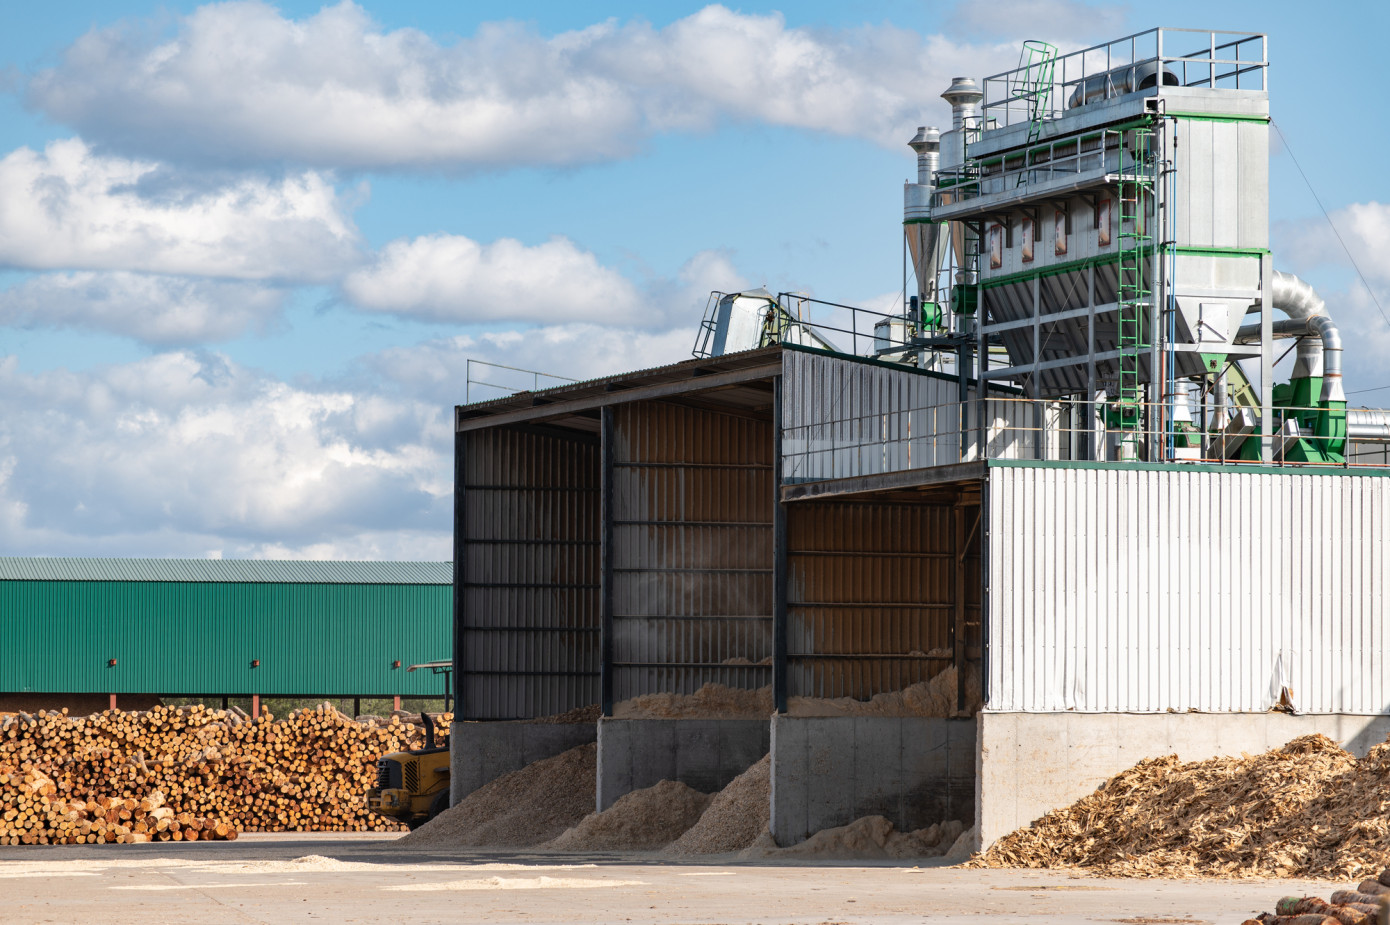 In February, price for wood chips imported to Japan slips 4%